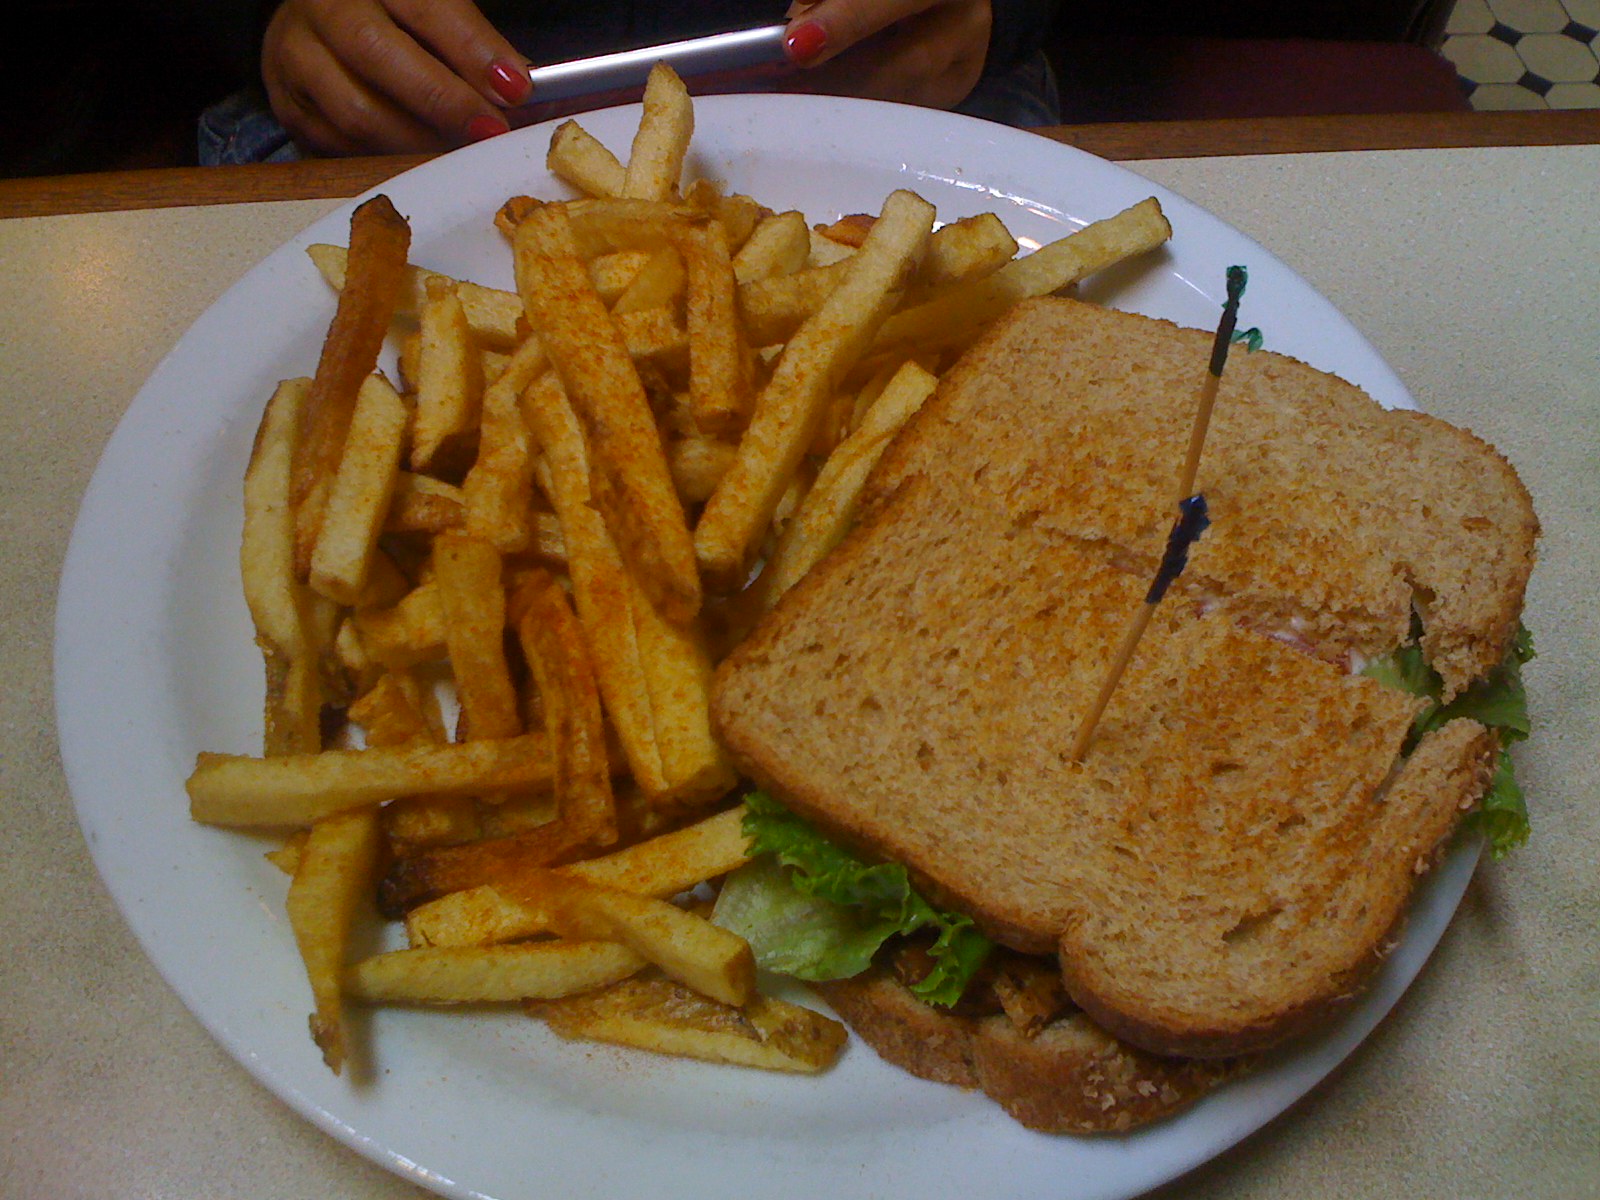 a sandwich and french fries sitting on a plate